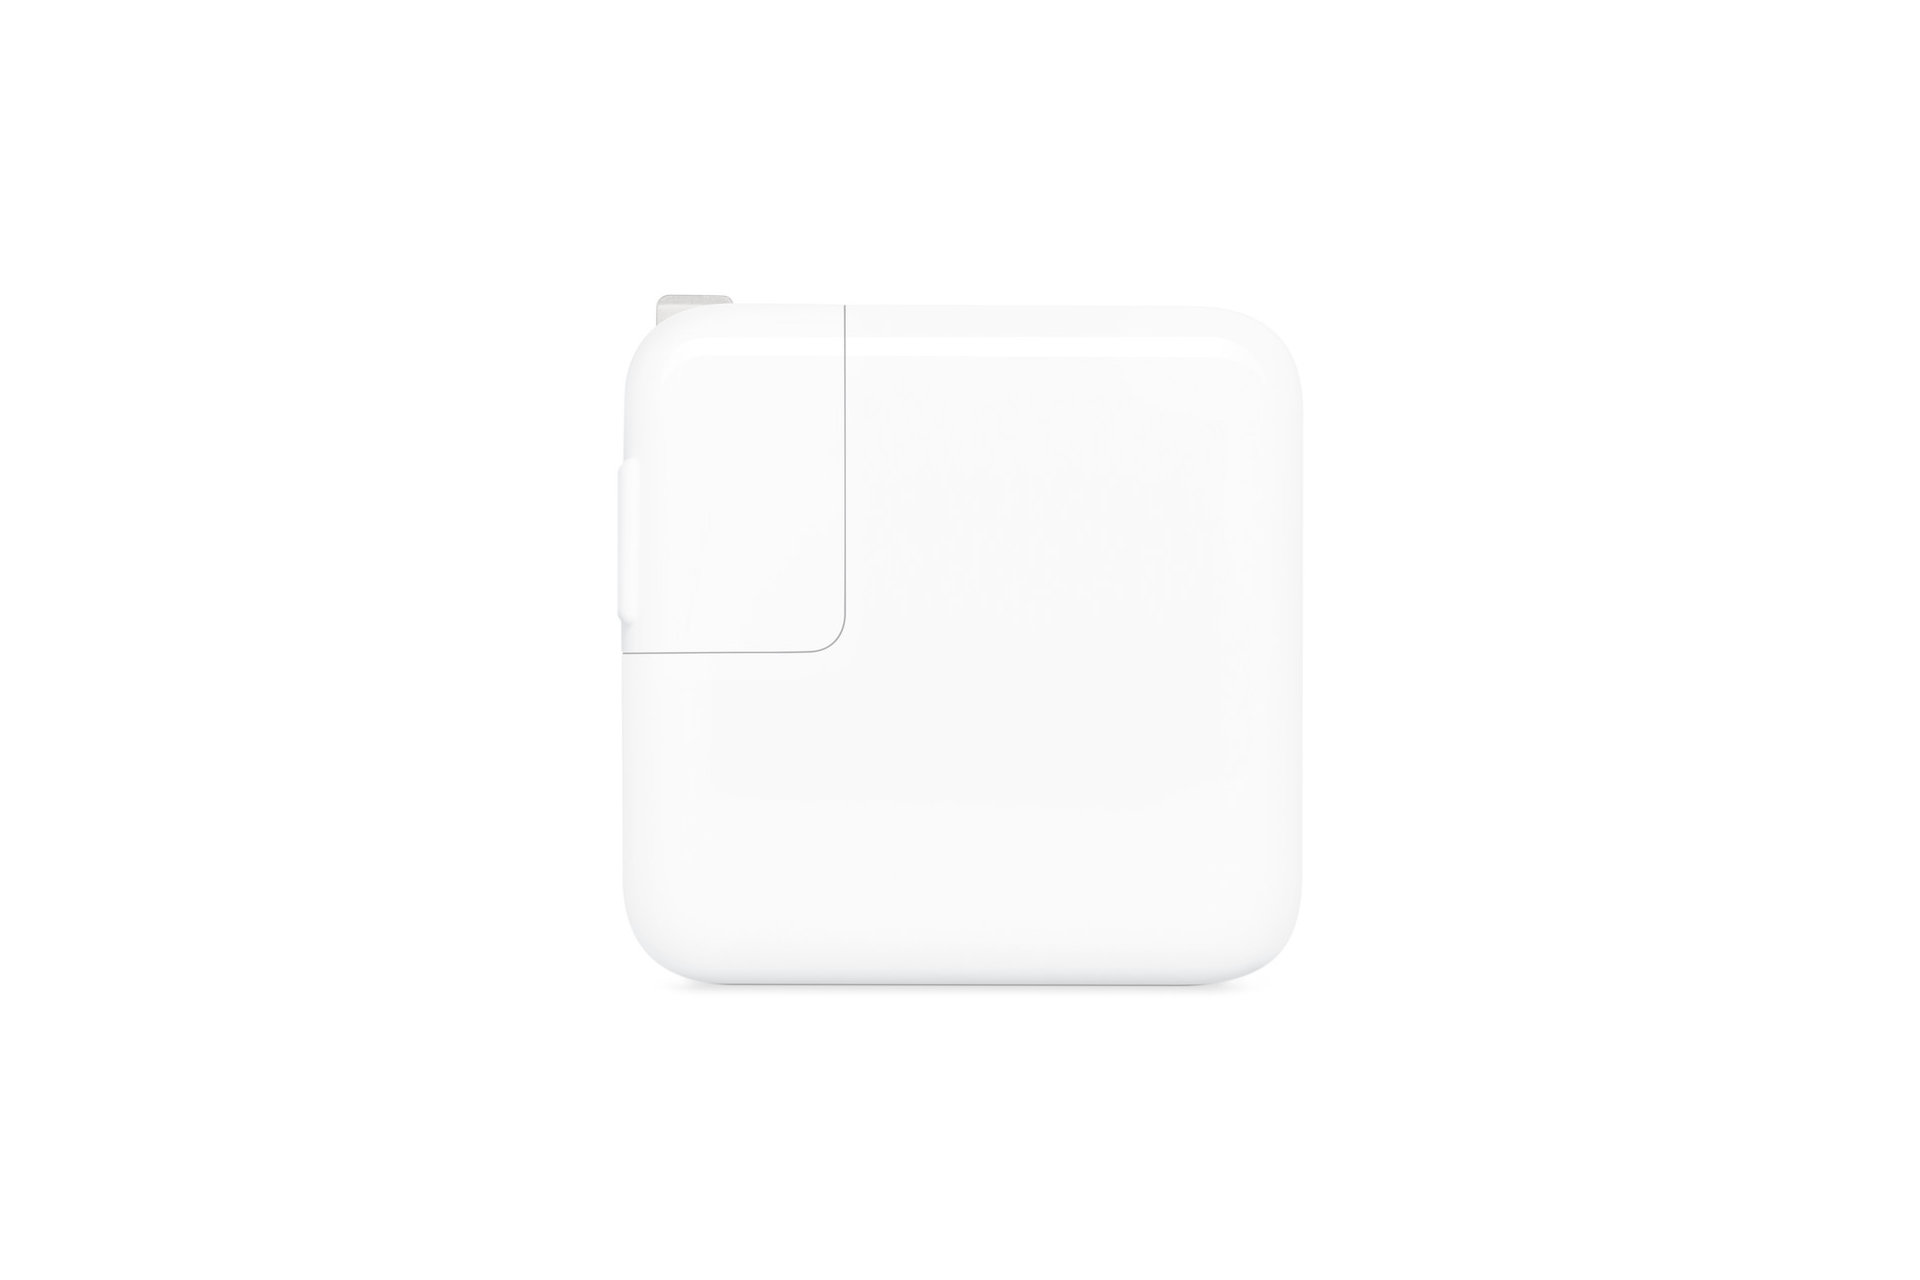 Apple 30W USB-C Power Adapter appears on a white background.